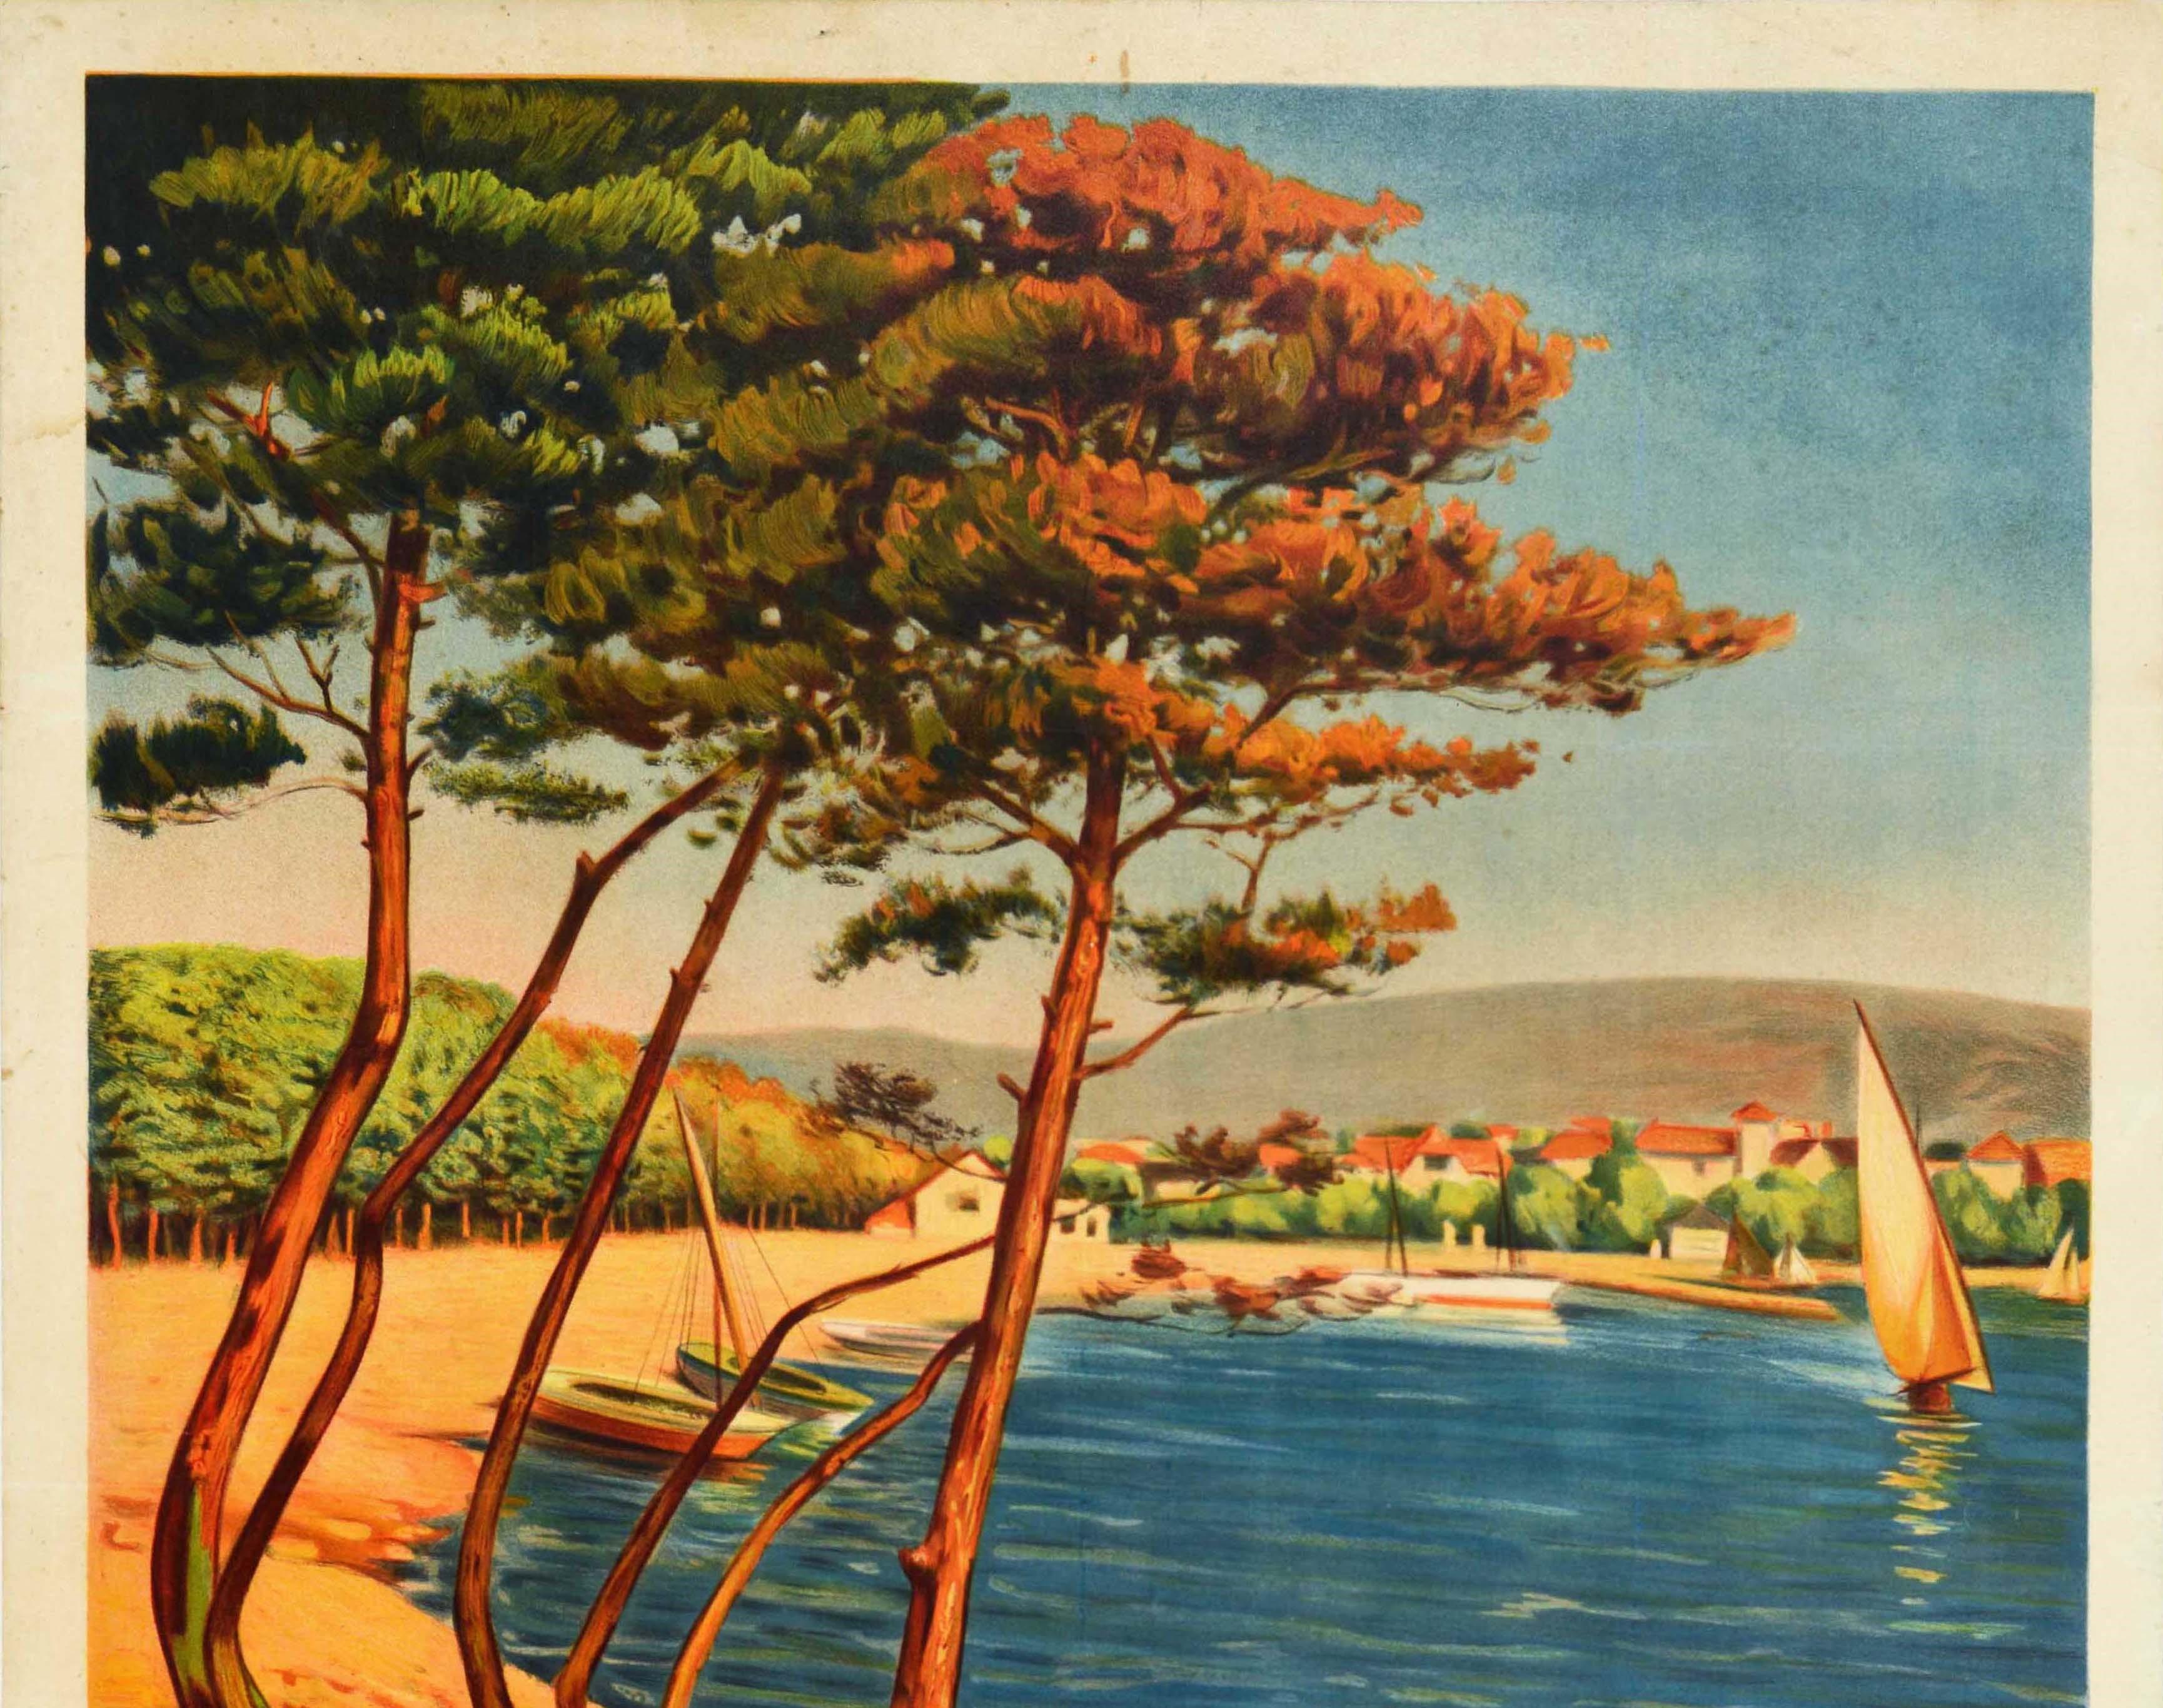 Original antique travel poster for the seaside resort village of Carry Le Rouet located 25km from Marseille featuring a scenic view of sailing boats at sea with trees in the foreground and hills in the distance behind the houses on the other side of